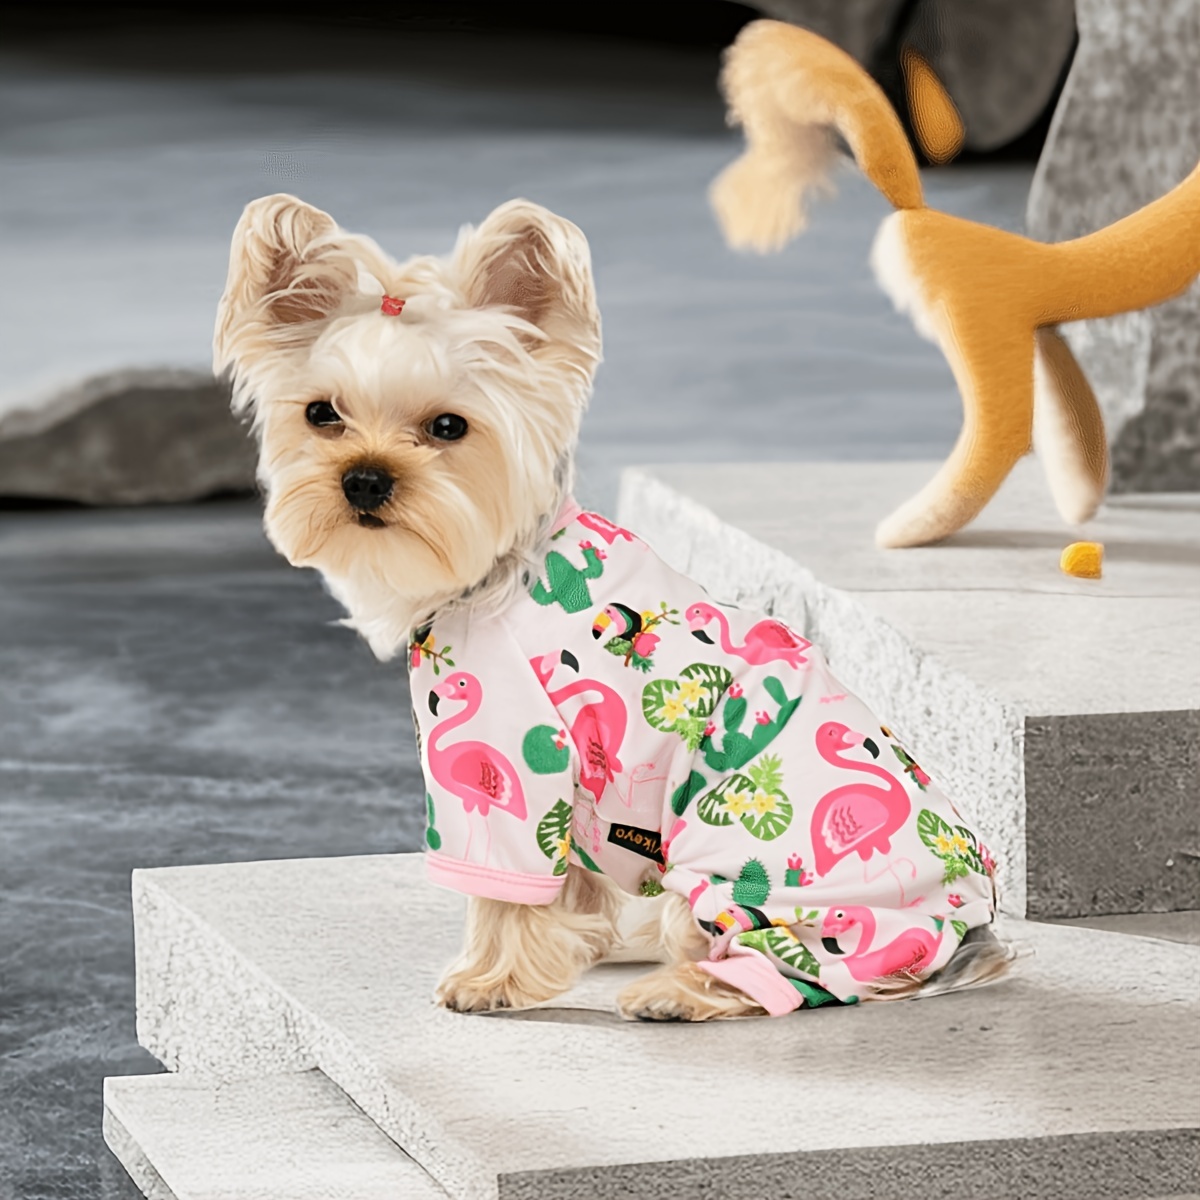  Fashion Dog Hoodies Basic Sweatshirts Hoodie for Small Dogs, Dog  Clothes Winter Cold Jacket Pet Pullover Jumper Sleeveless Sweater with Hood  for Chihuahua Yorkie Puppy : Pet Supplies